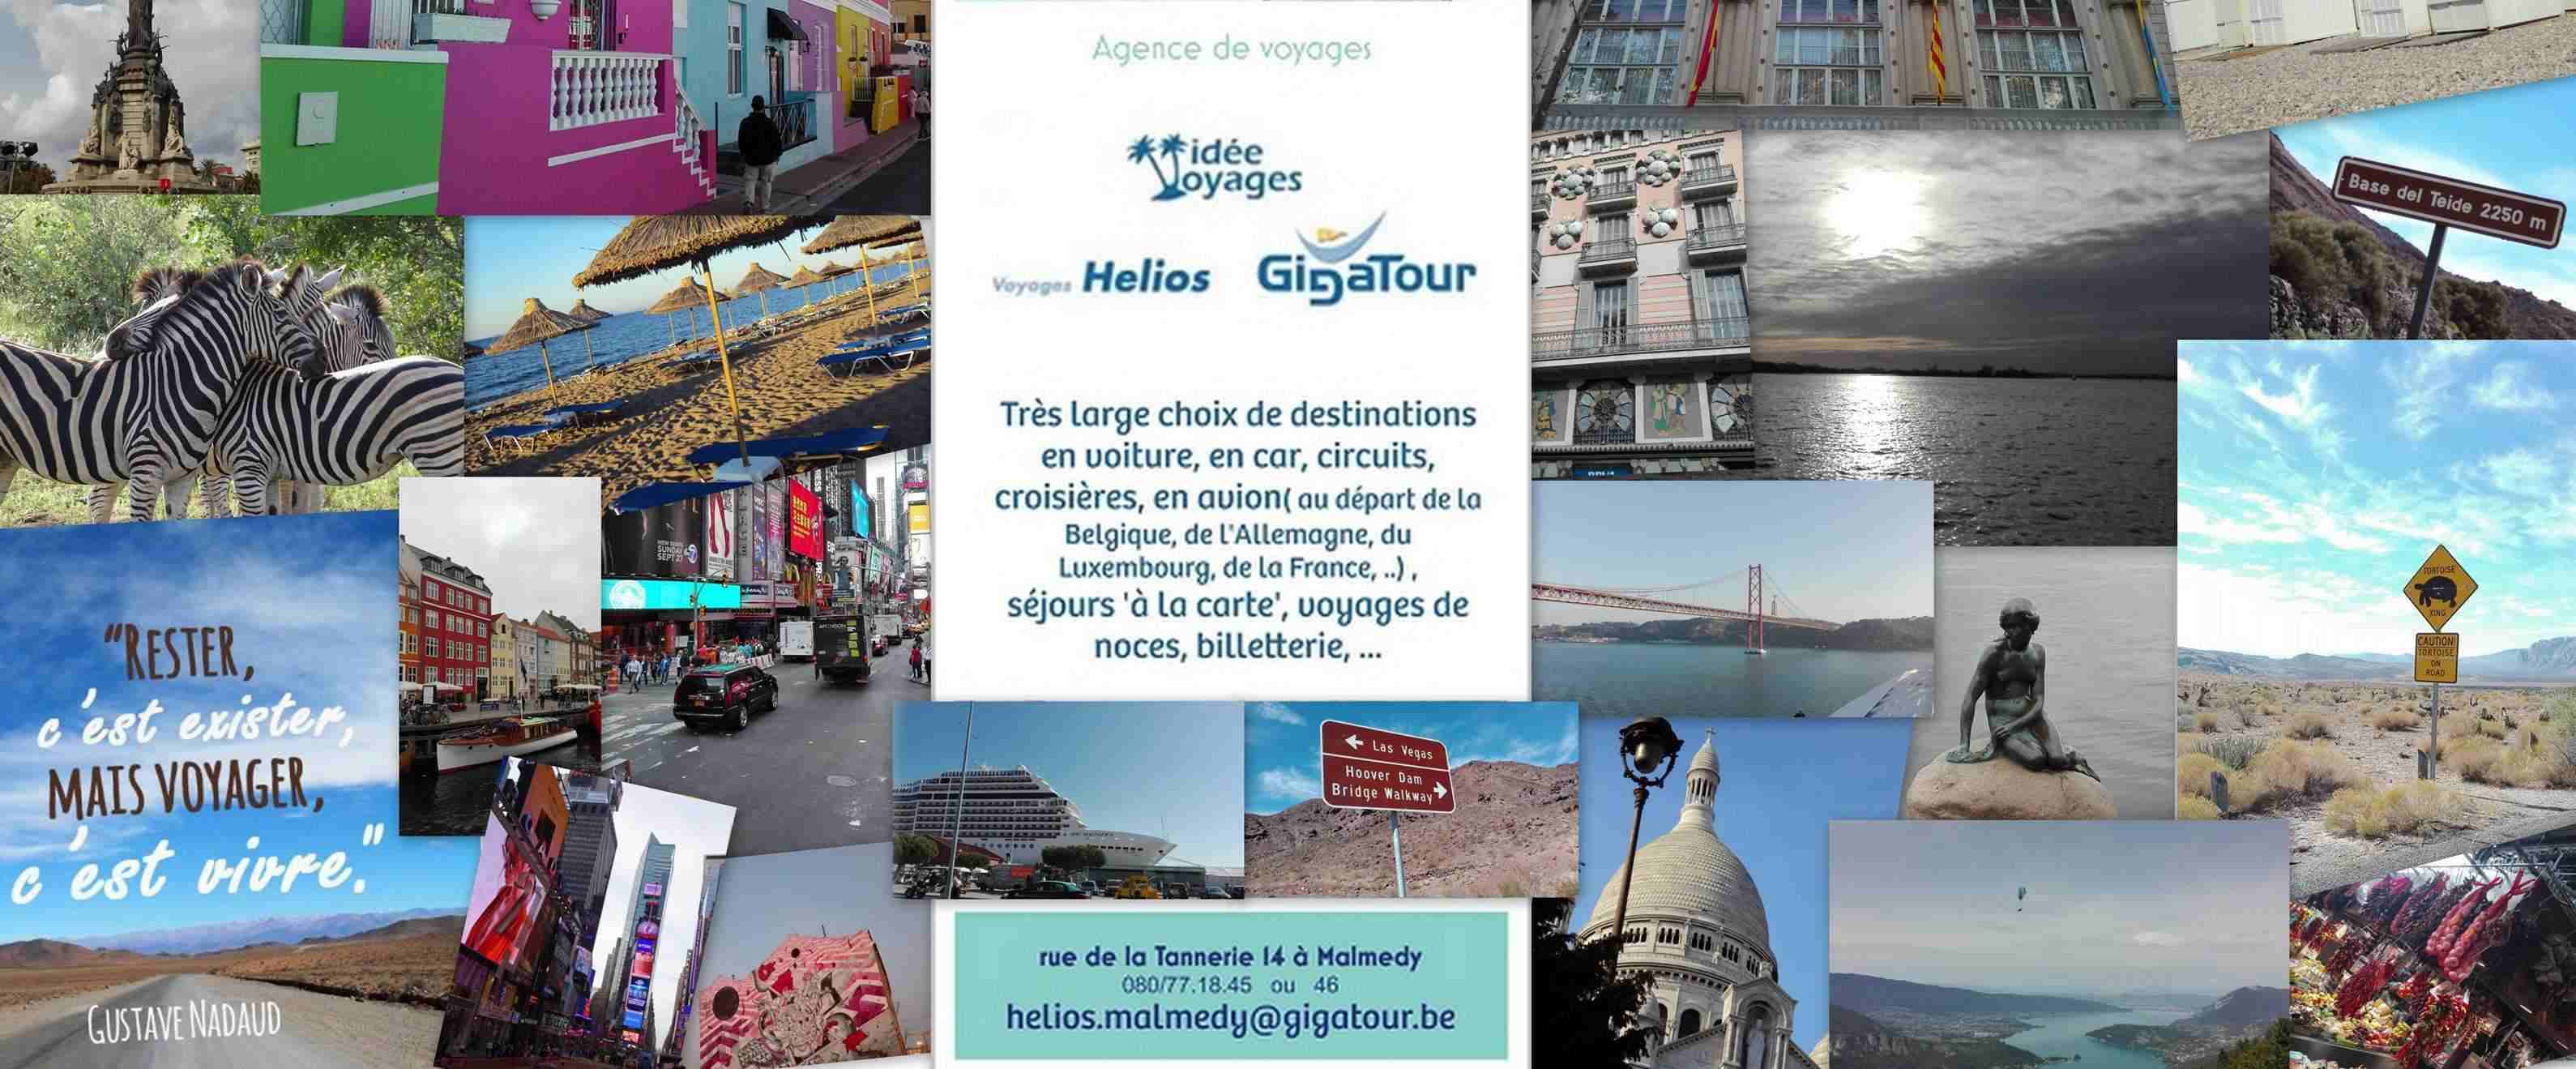 logo_helios-gigatour-idee-voyages_cover2aa.jpg